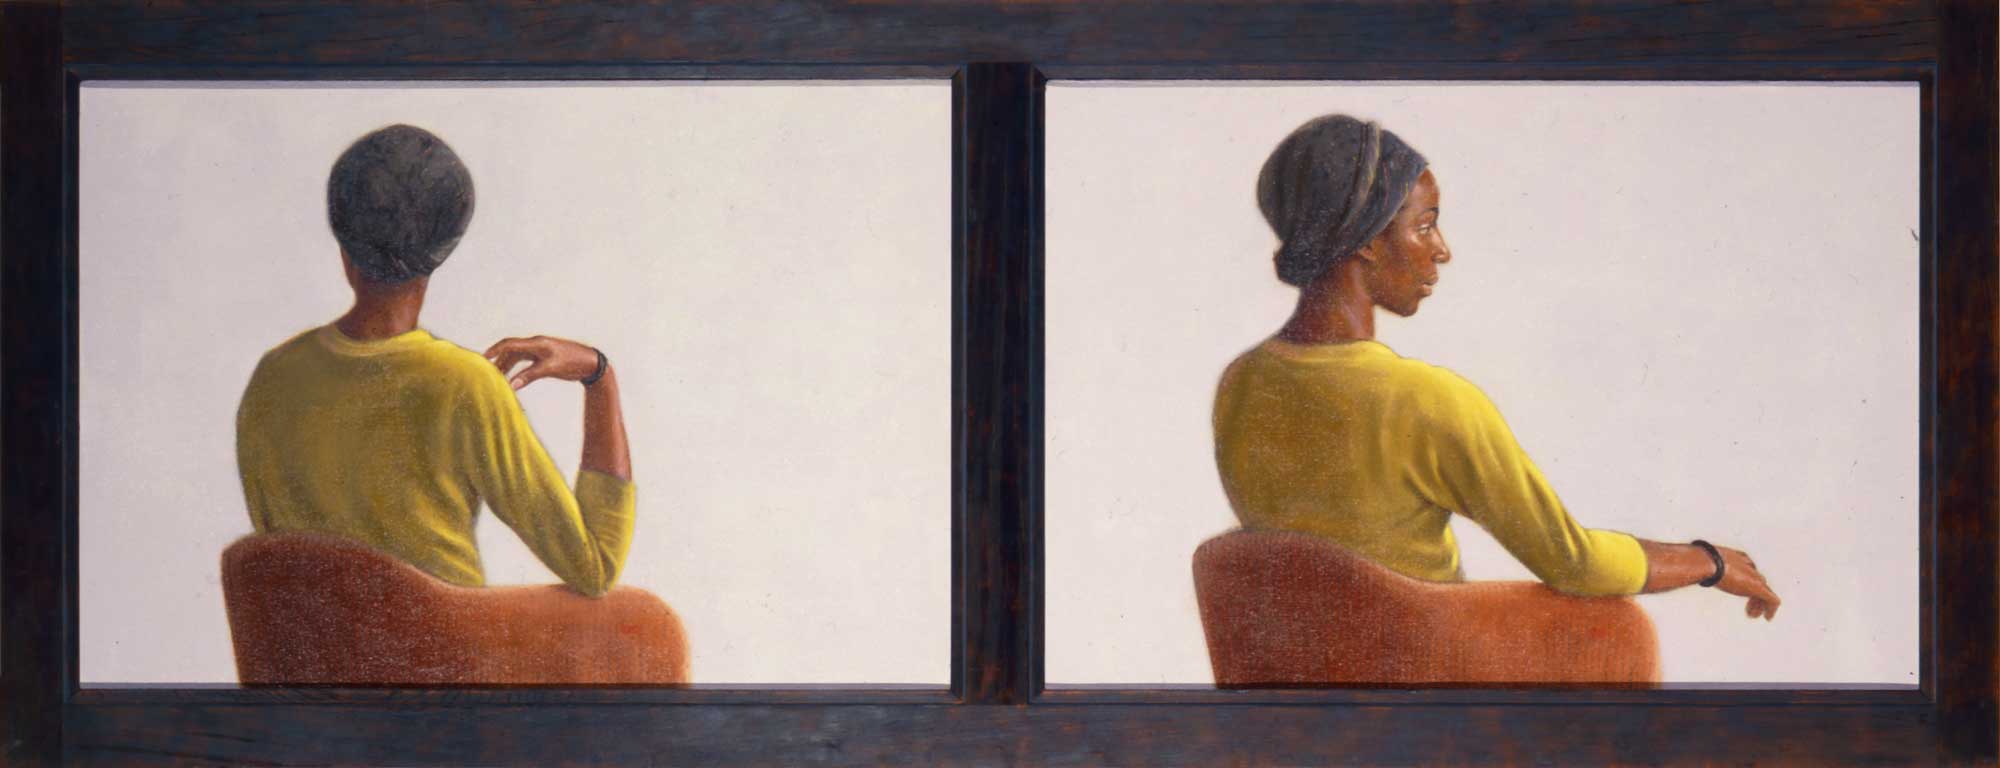 A Diptych of the back of a women sitting in a chair.